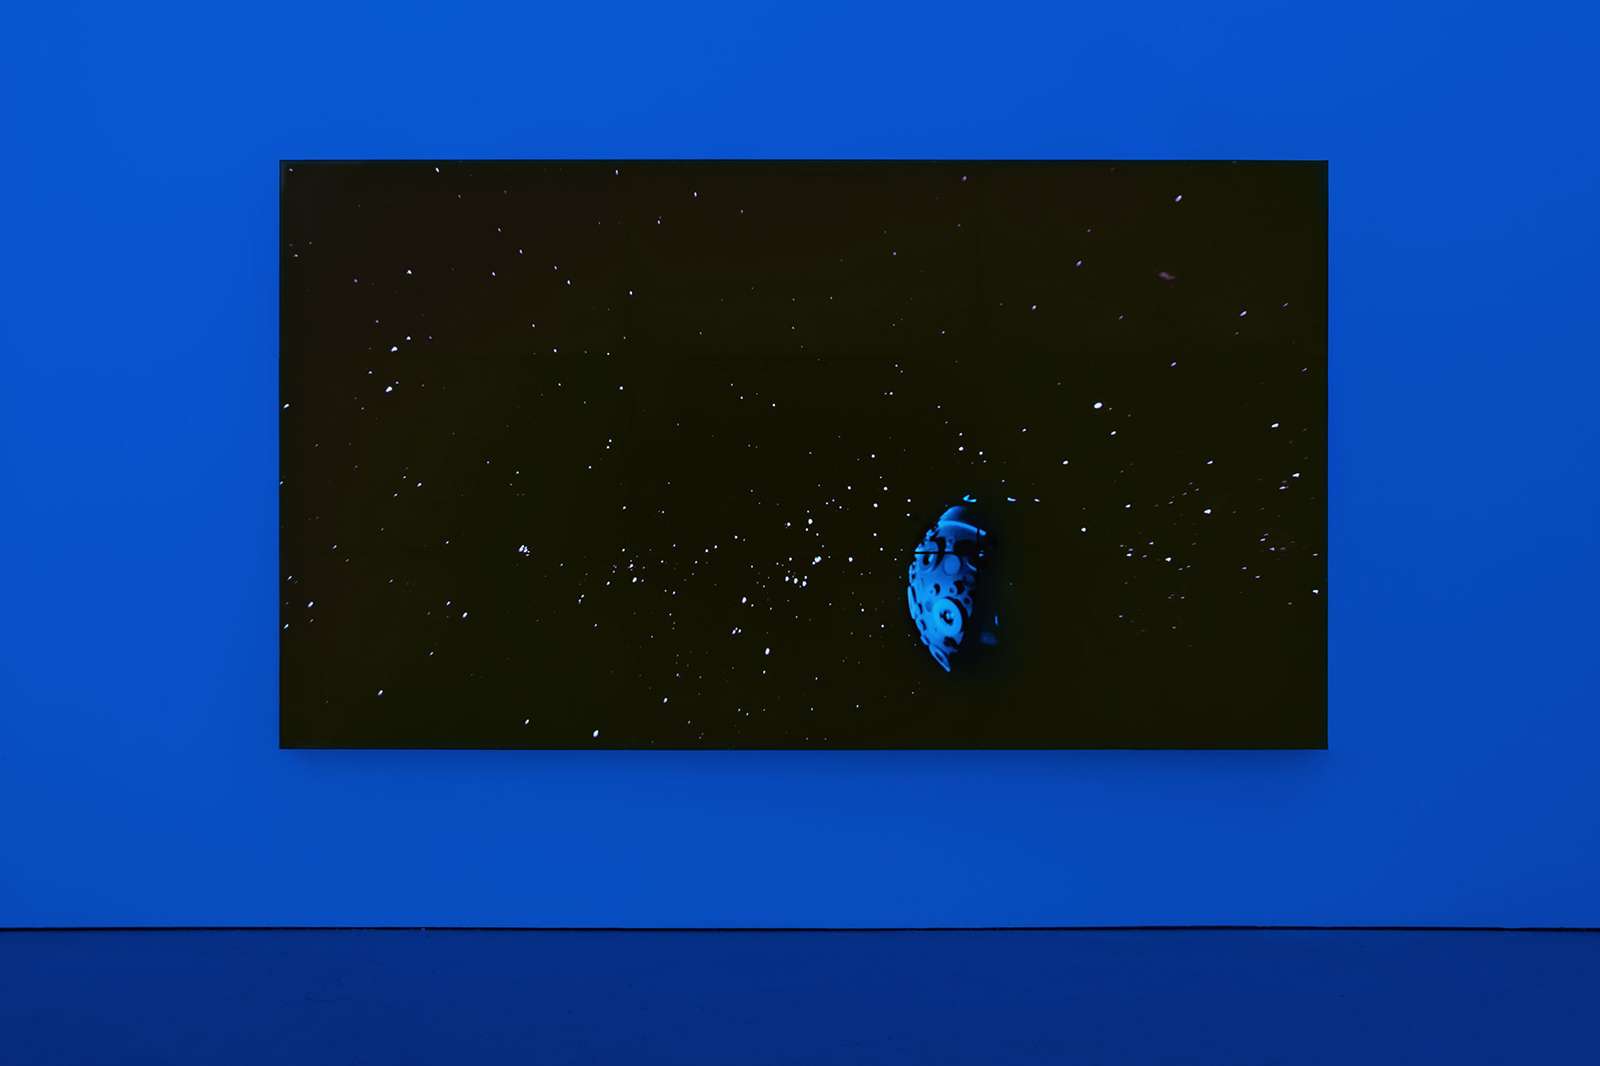 Diana Thater, The Starry Messenger, 2014. Courtesy the artist and David Zwirner, New York/London